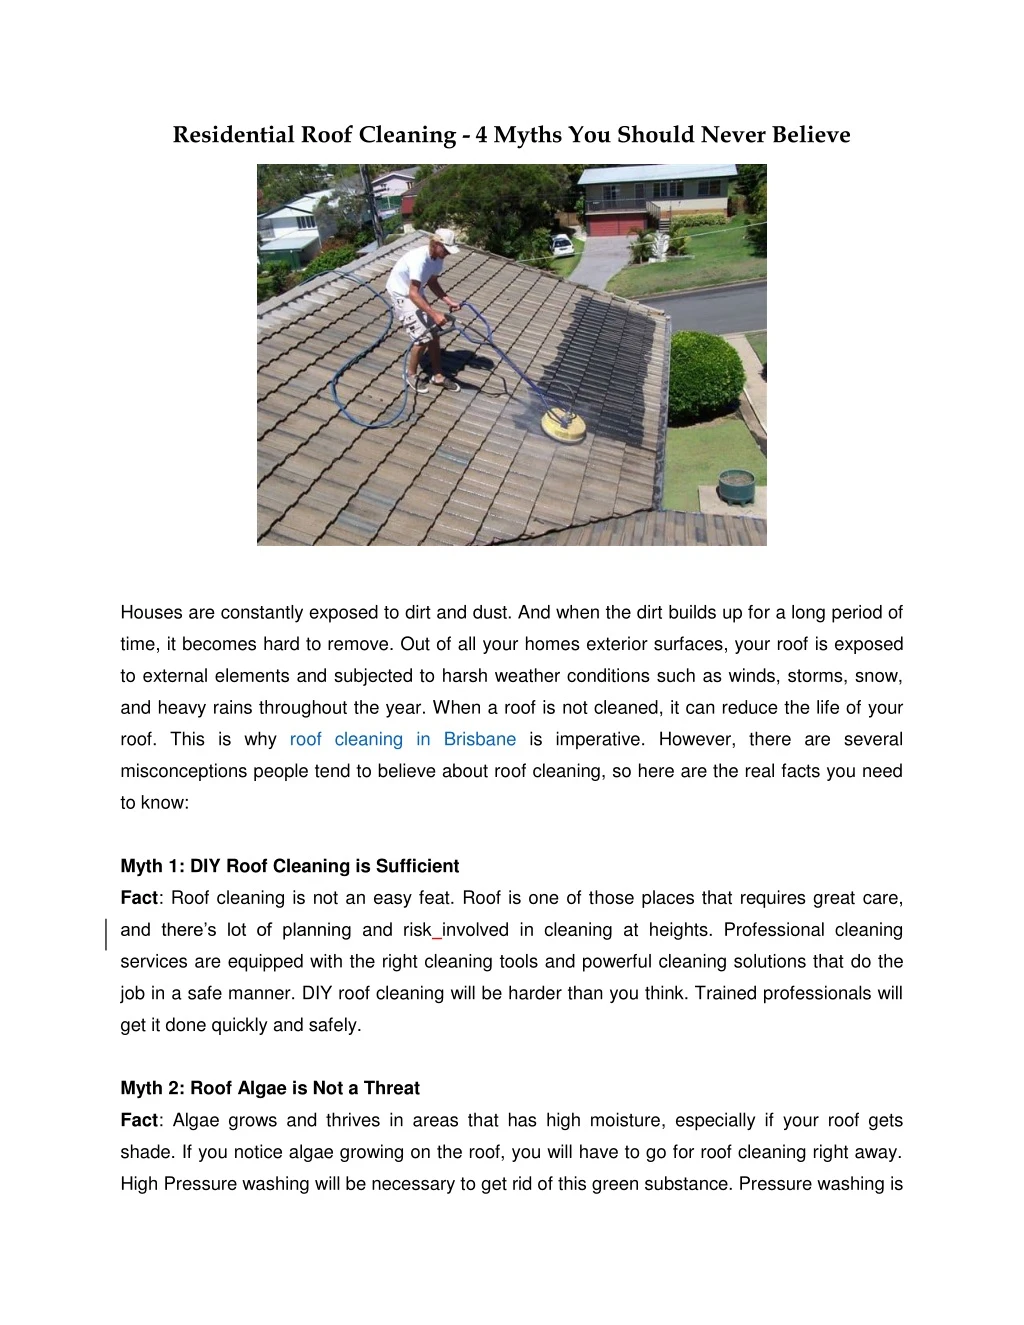 residential roof cleaning 4 myths you should